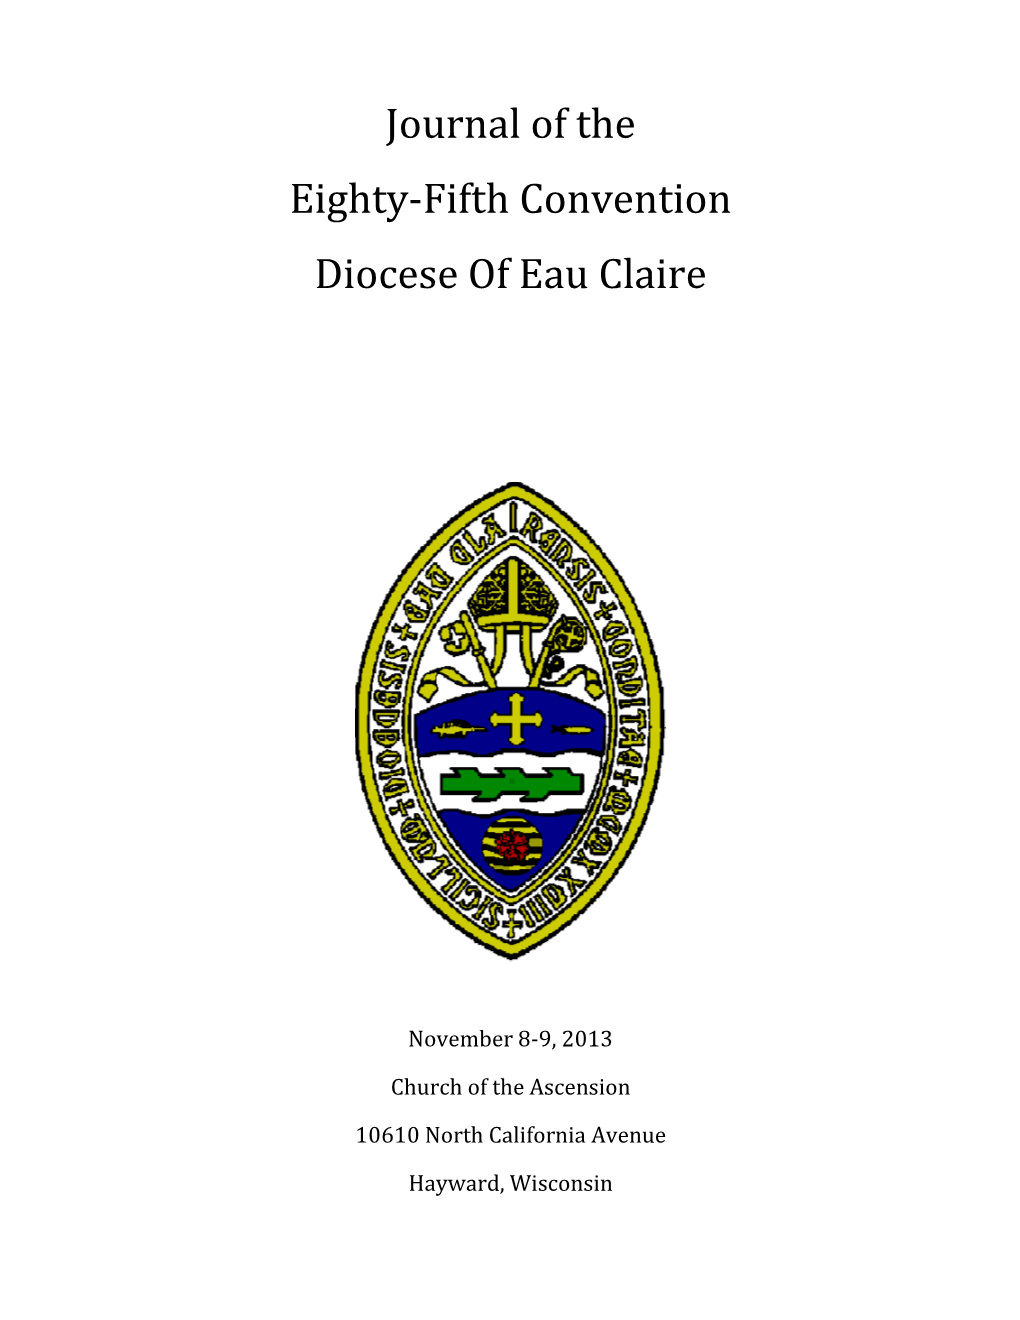 Journal of the Eighty-Fifth Convention Diocese of Eau Claire